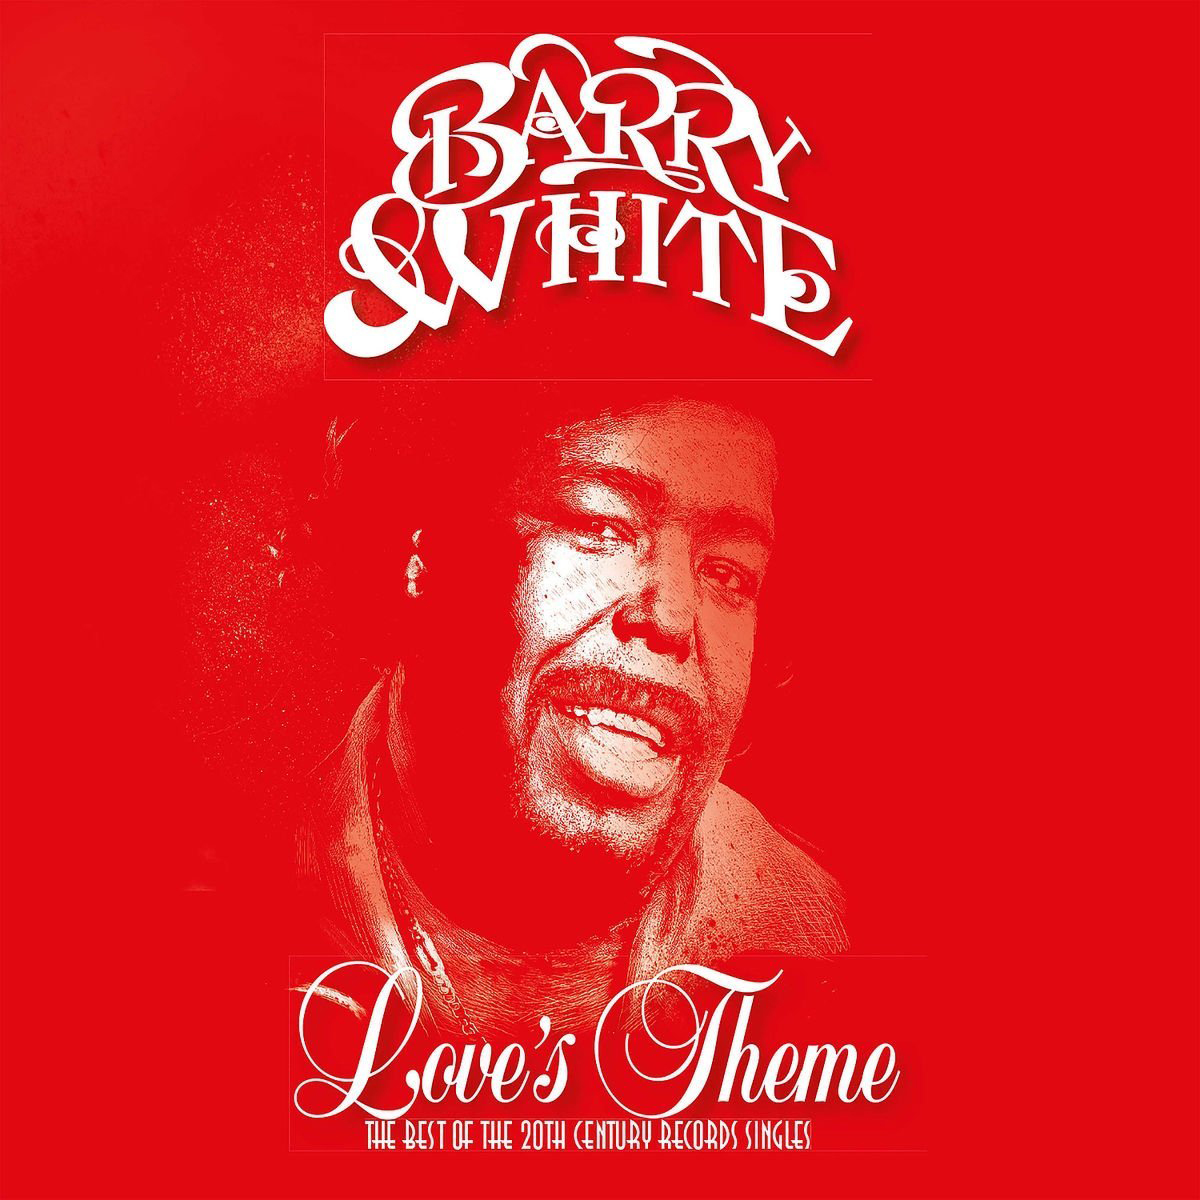 Barry White Love's Theme: The Best Of The 20th Century Records Singles (Vinyl) - Photo 1/1